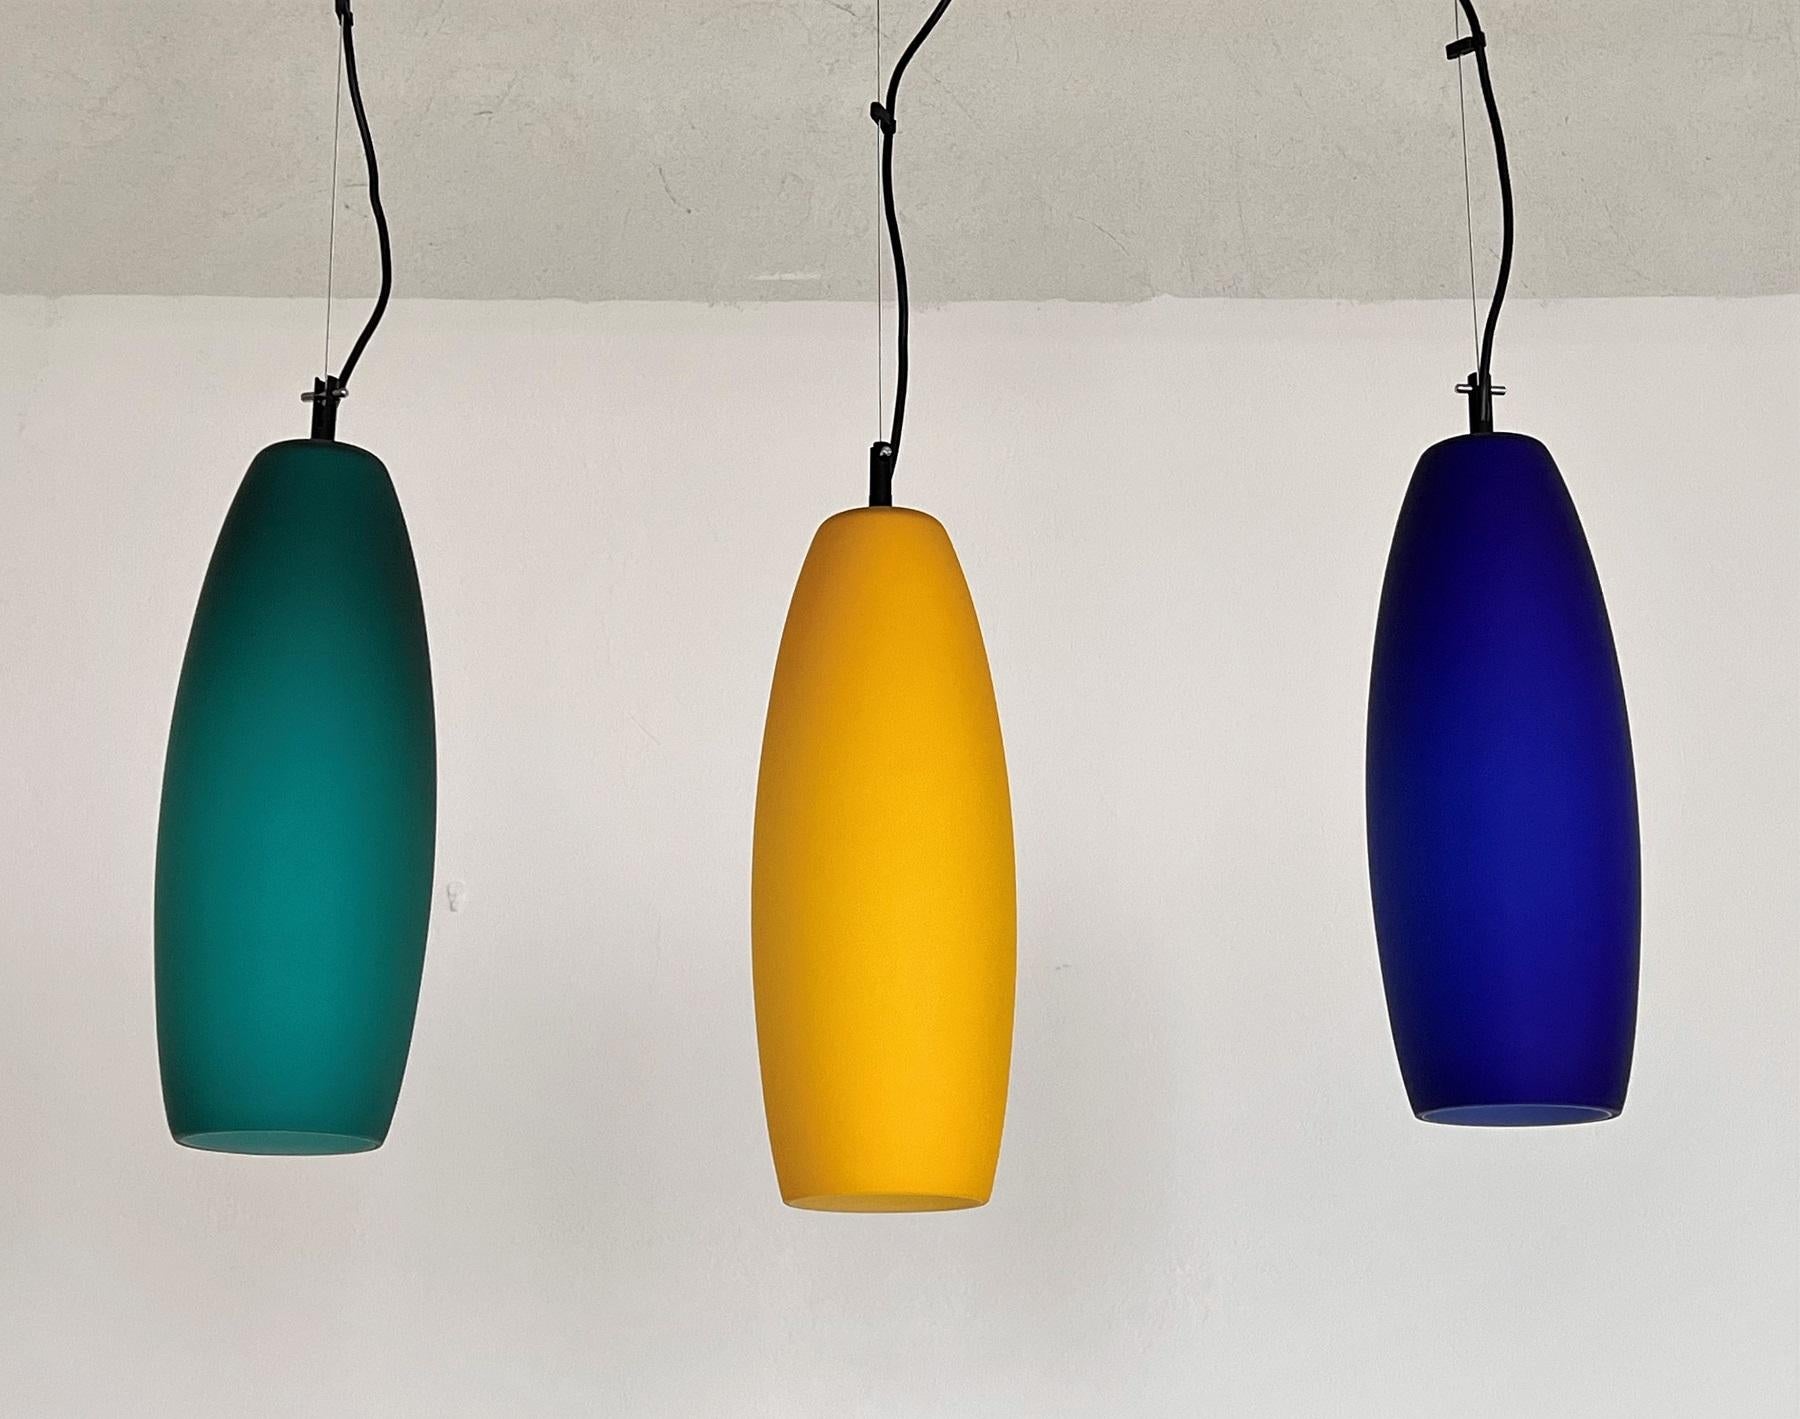 Beautiful set of three satin frosted glass pendant lights in different colors: blue, green and yellow.
All three glasses have a white inside glass layer.
Made in Murano, Italy, in the late mid-century of the 1970s, by De Majo Murano. The blue